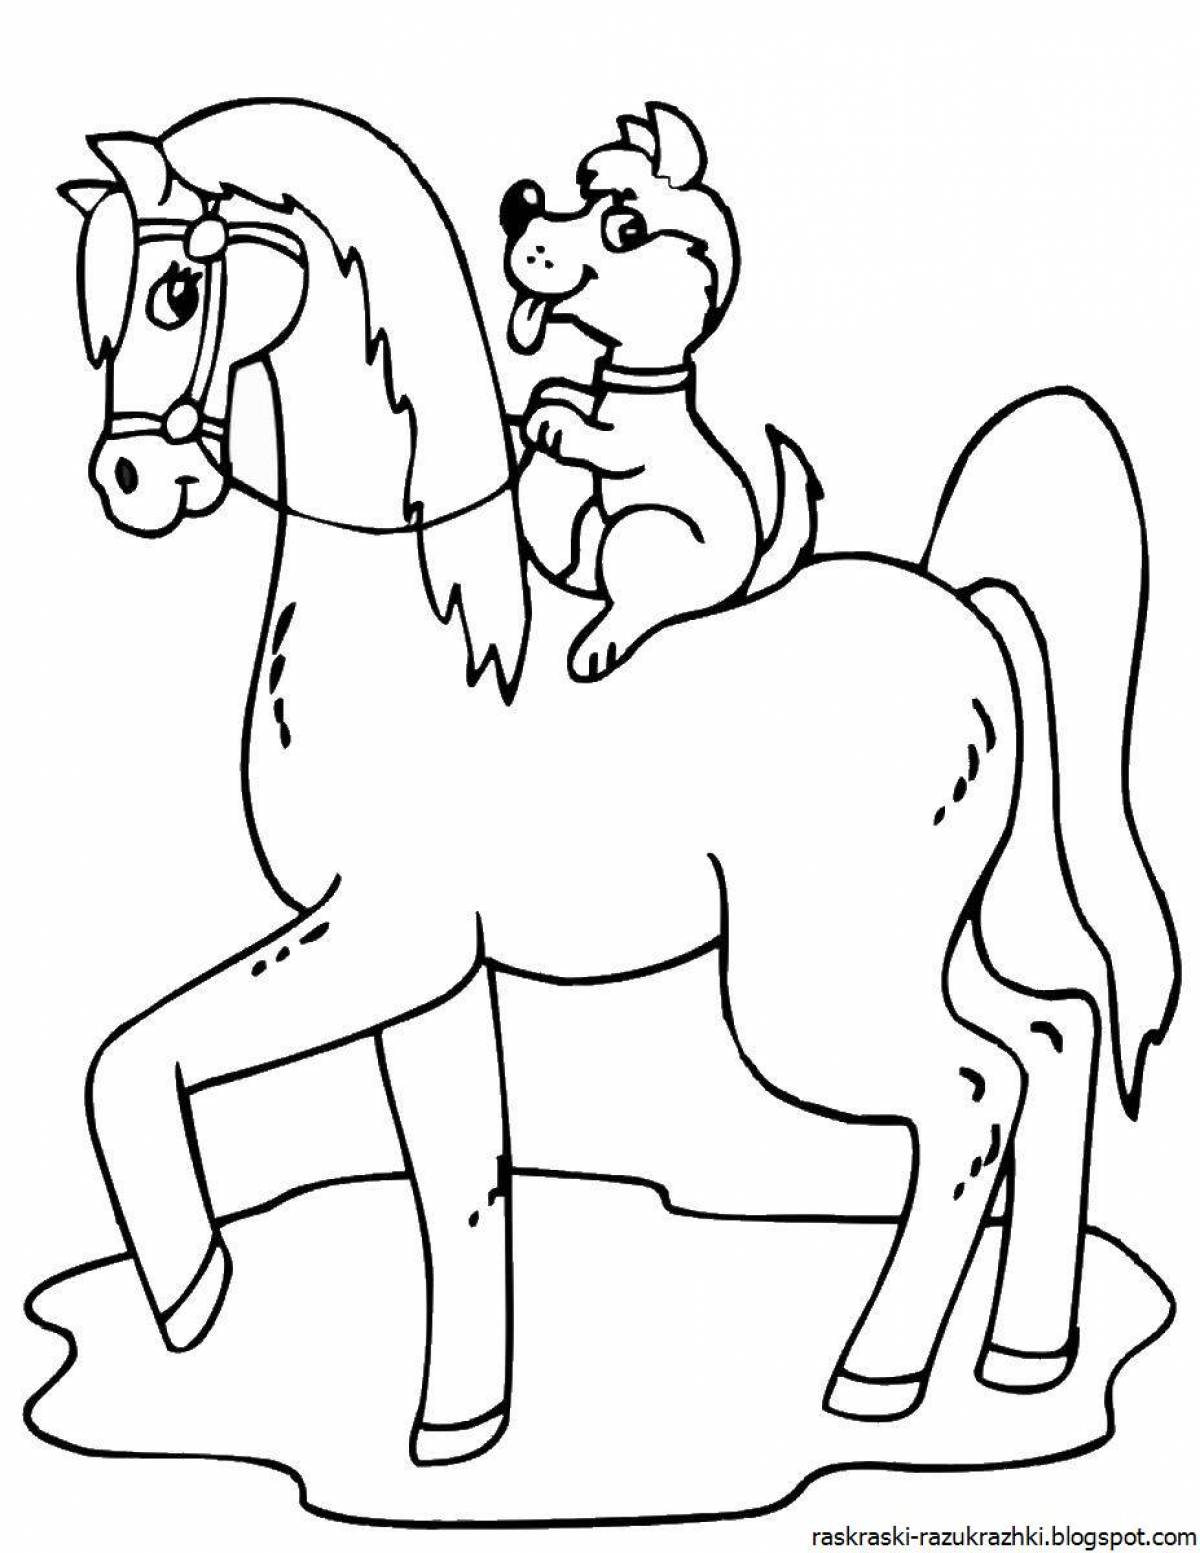 Playful Welsh pony horse coloring book for kids